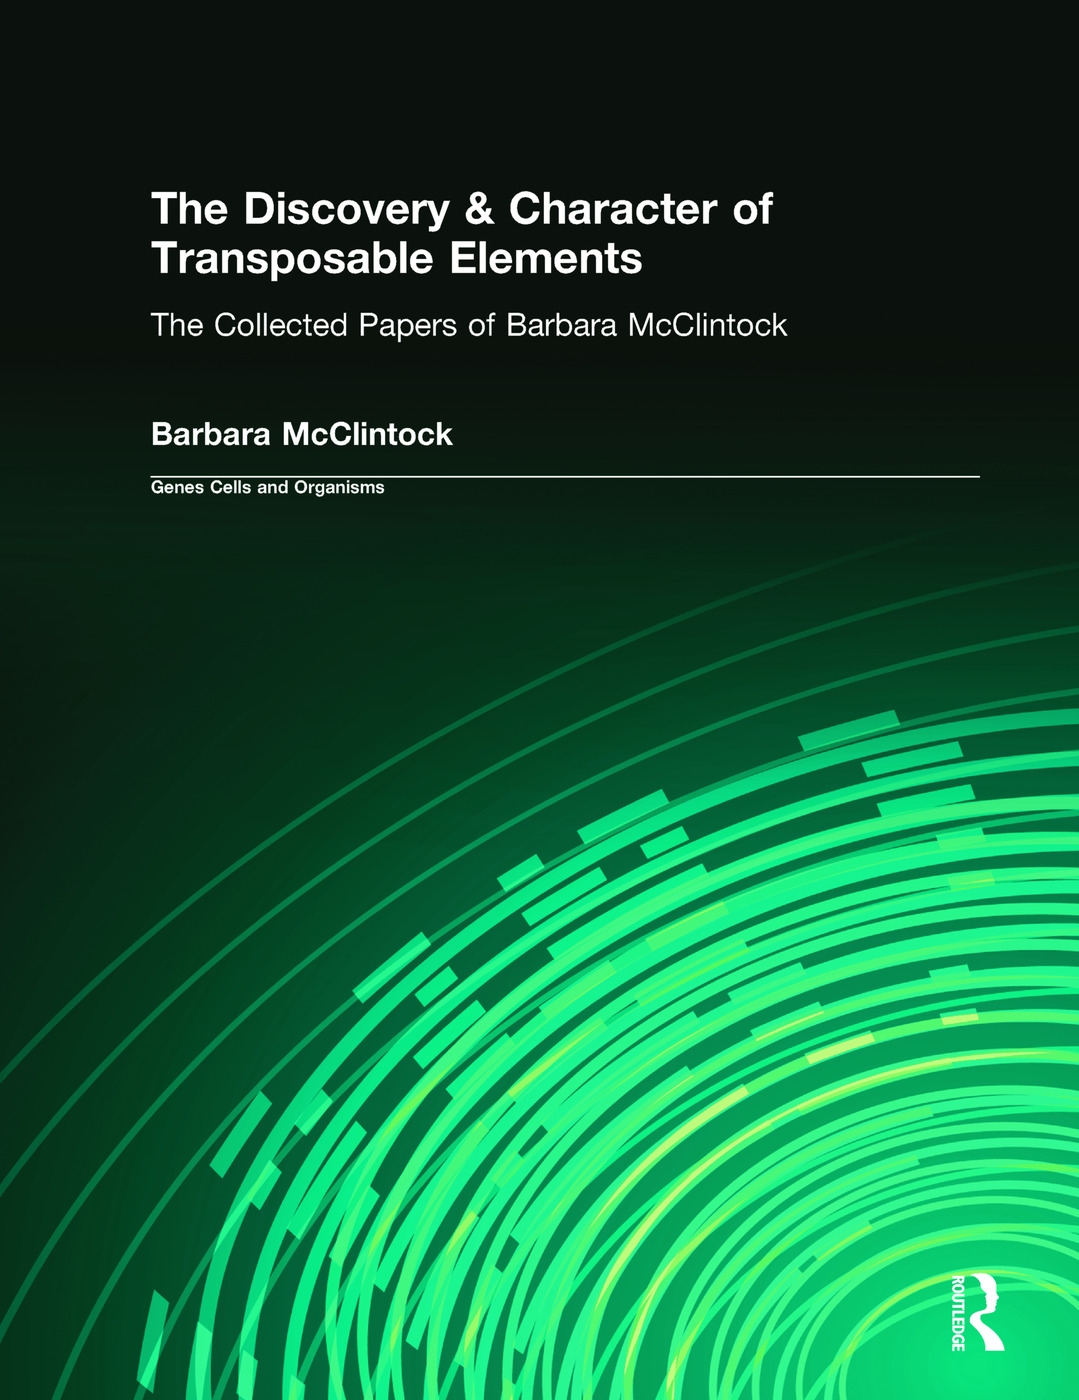 The Discovery & Character of Transposable Elements: The Collected Papers (1938-1984) of Barbara McClintock